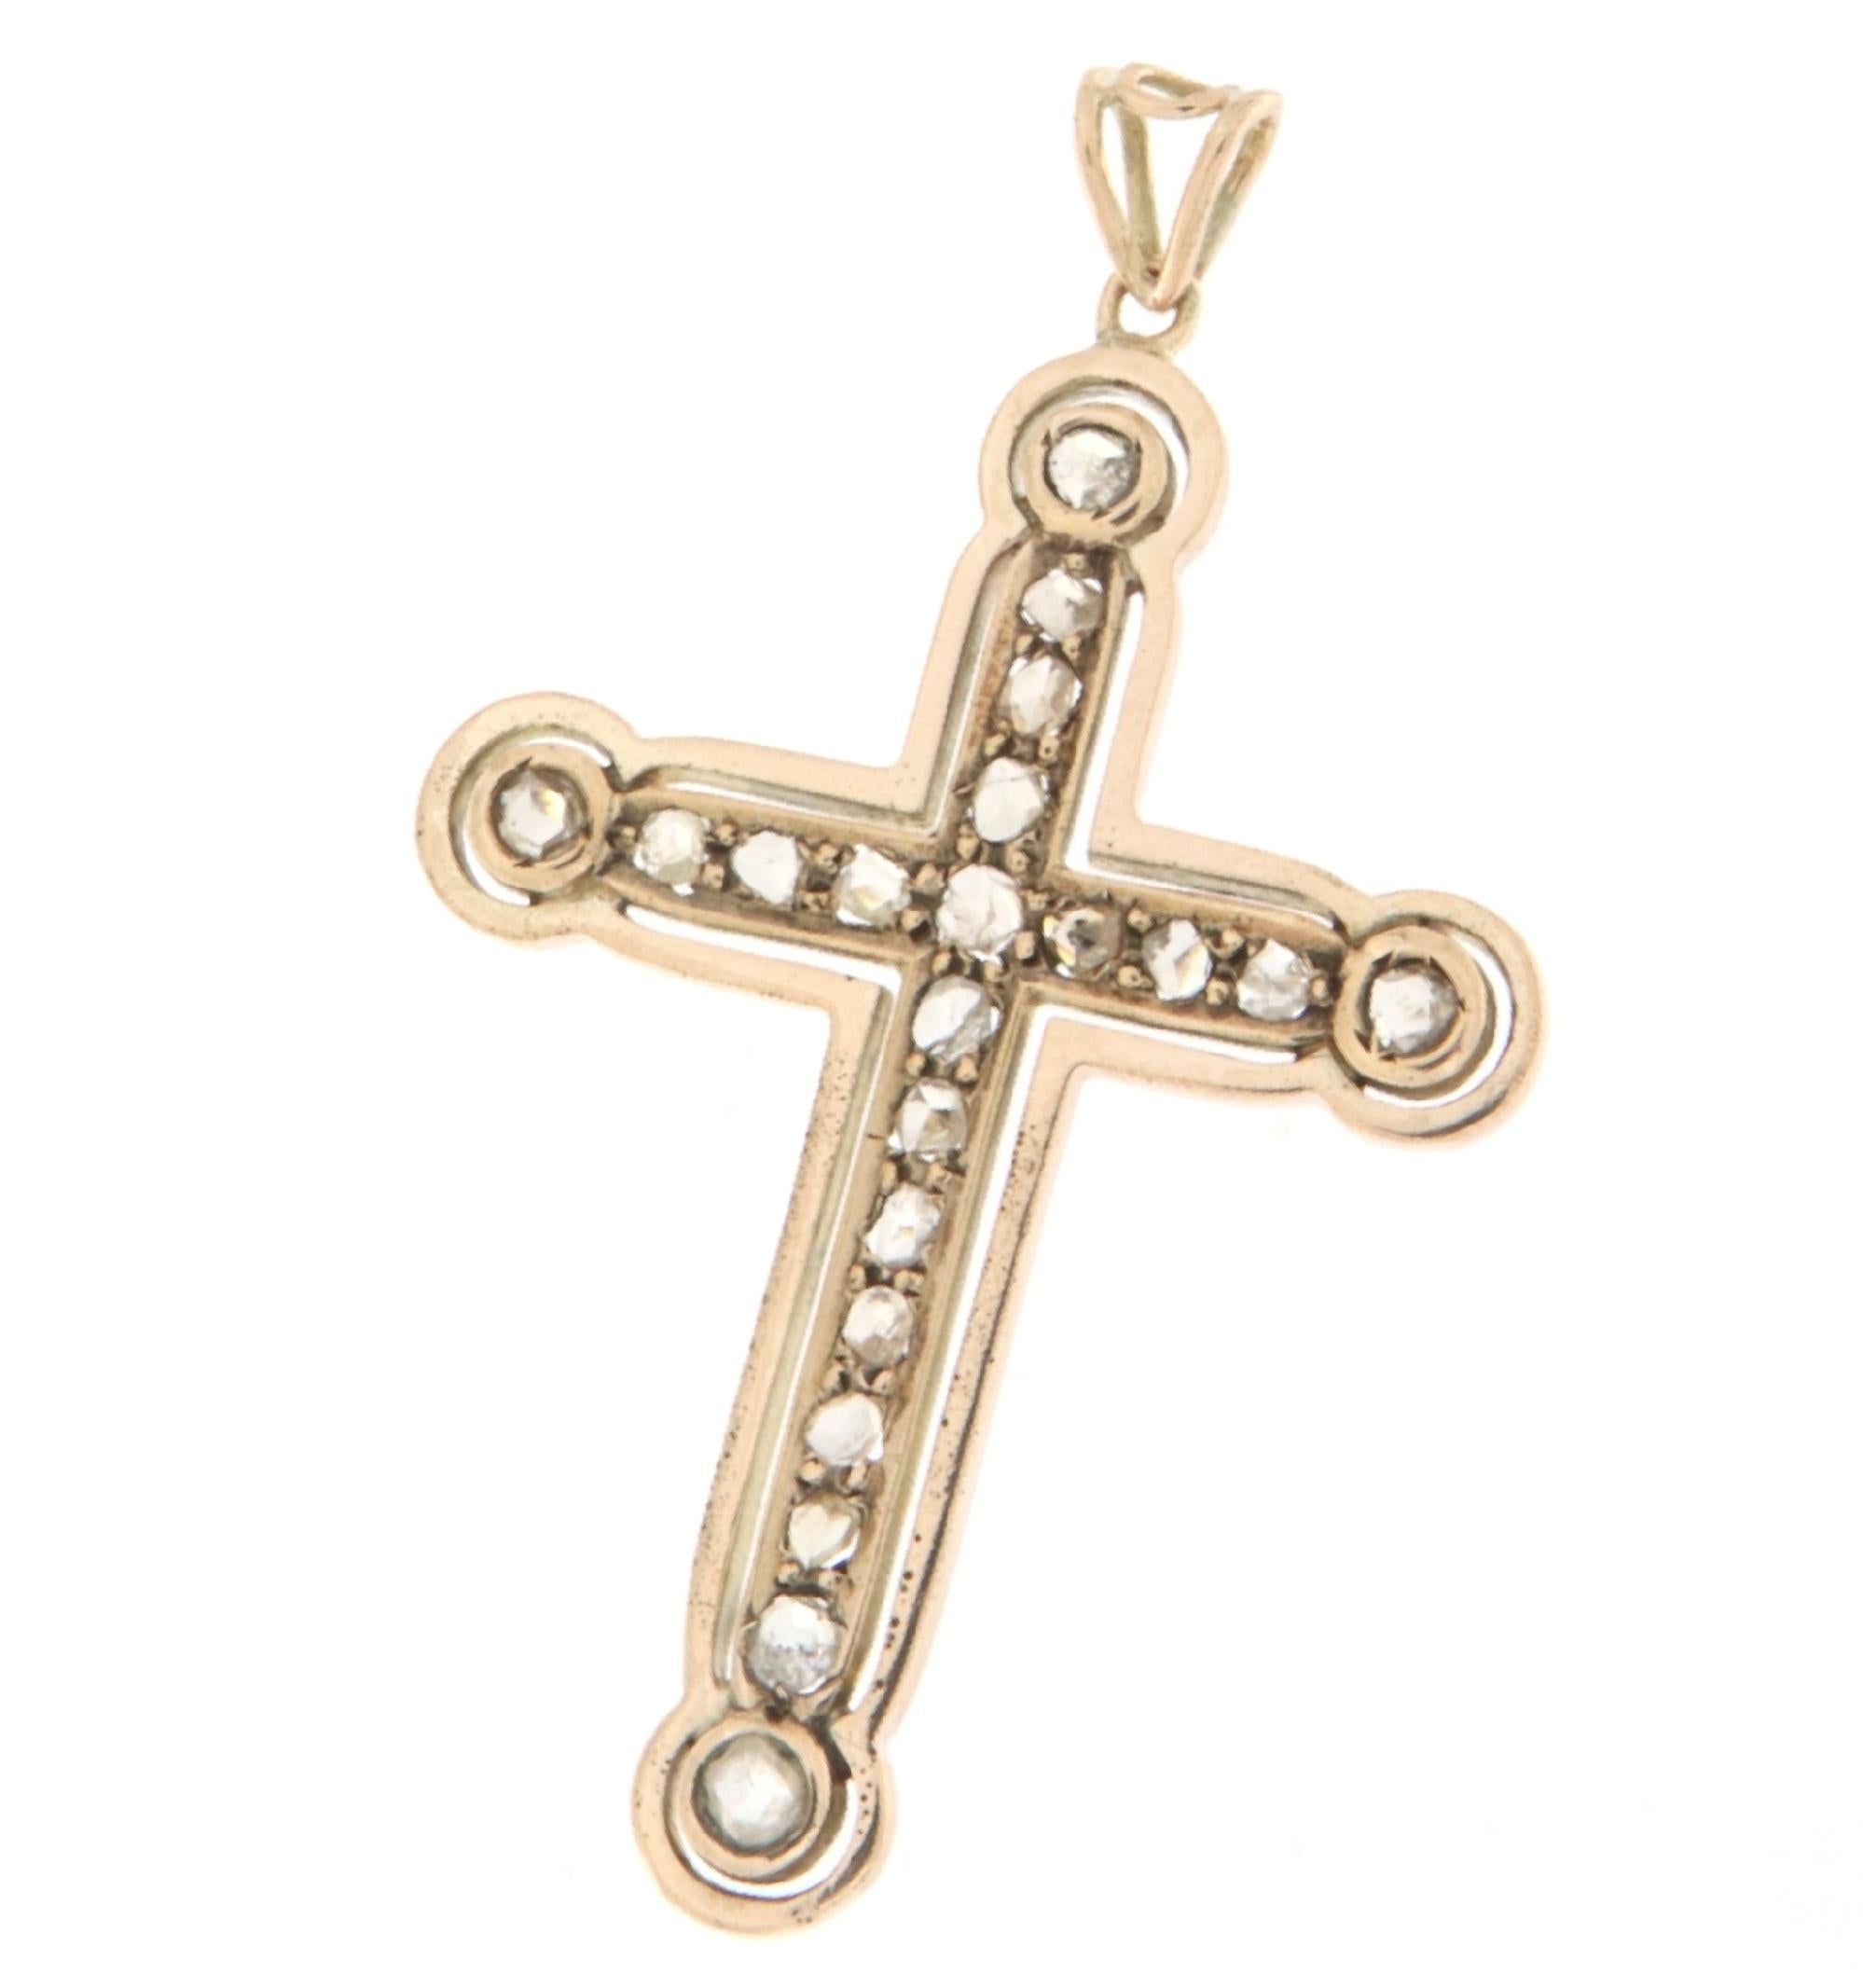 This exquisite 1940s cross pendant, crafted in 9-karat yellow gold, carries the unchanged luster of years past. Set with old-cut diamonds, each stone is masterfully embedded, enhancing the iconic shape of the cross with a glow that captures both